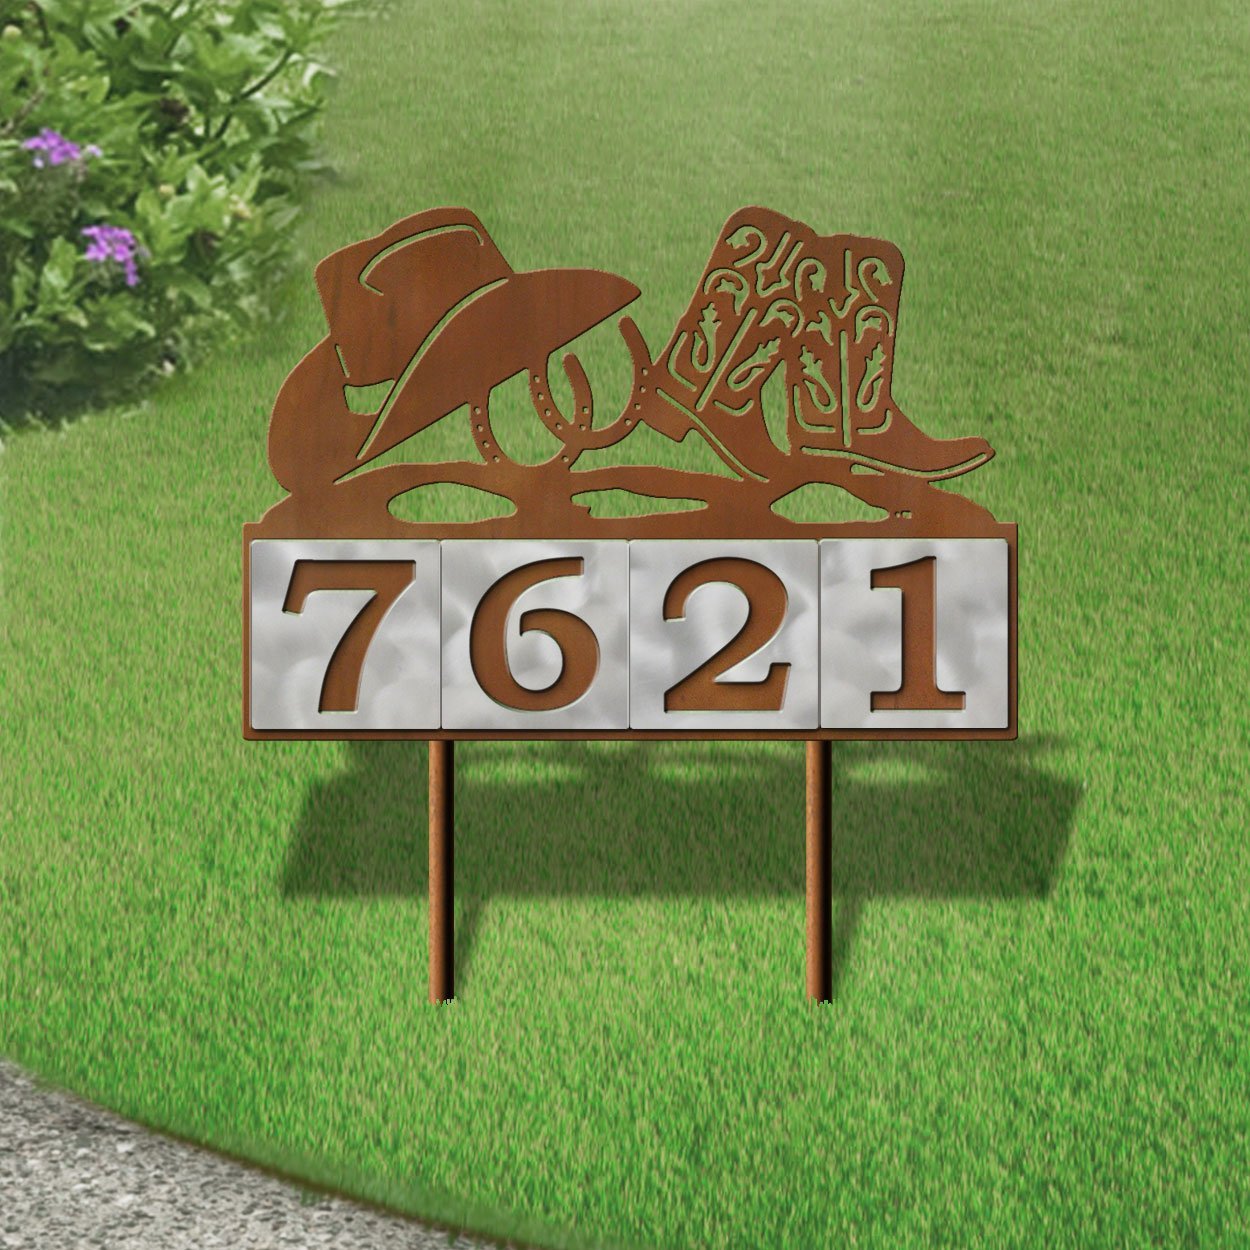 610044 - Cowboy Boots with Hat and Horseshoes Design 4-Digit Horizontal 6-inch Tile Outdoor House Numbers Yard Sign